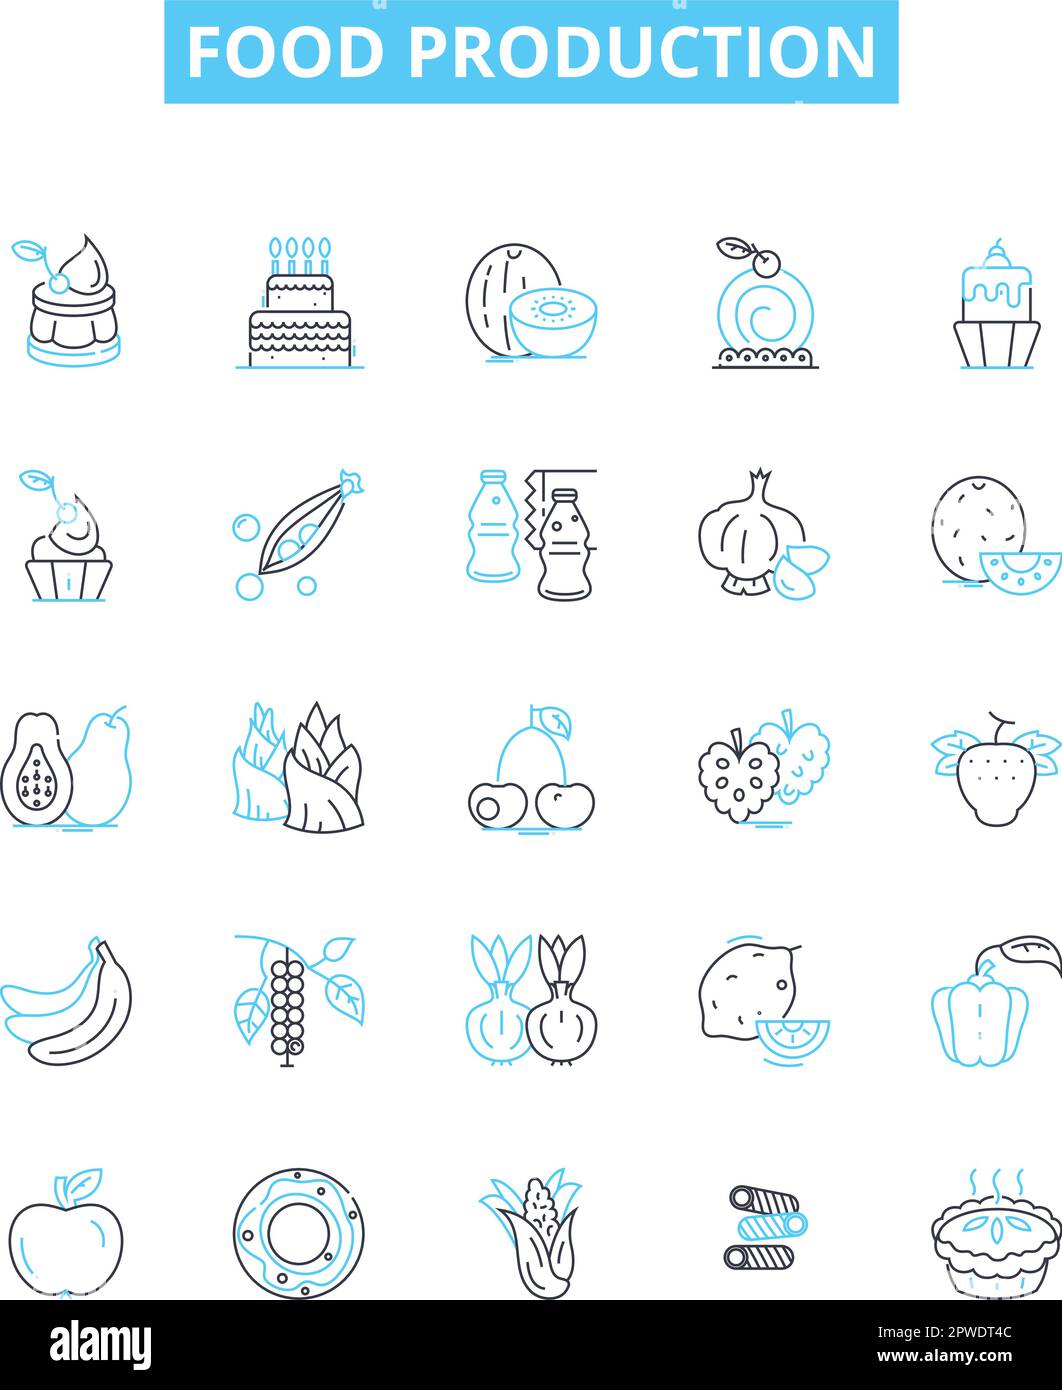 Food production vector line icons set. Farming, Agriculture, Processed ...